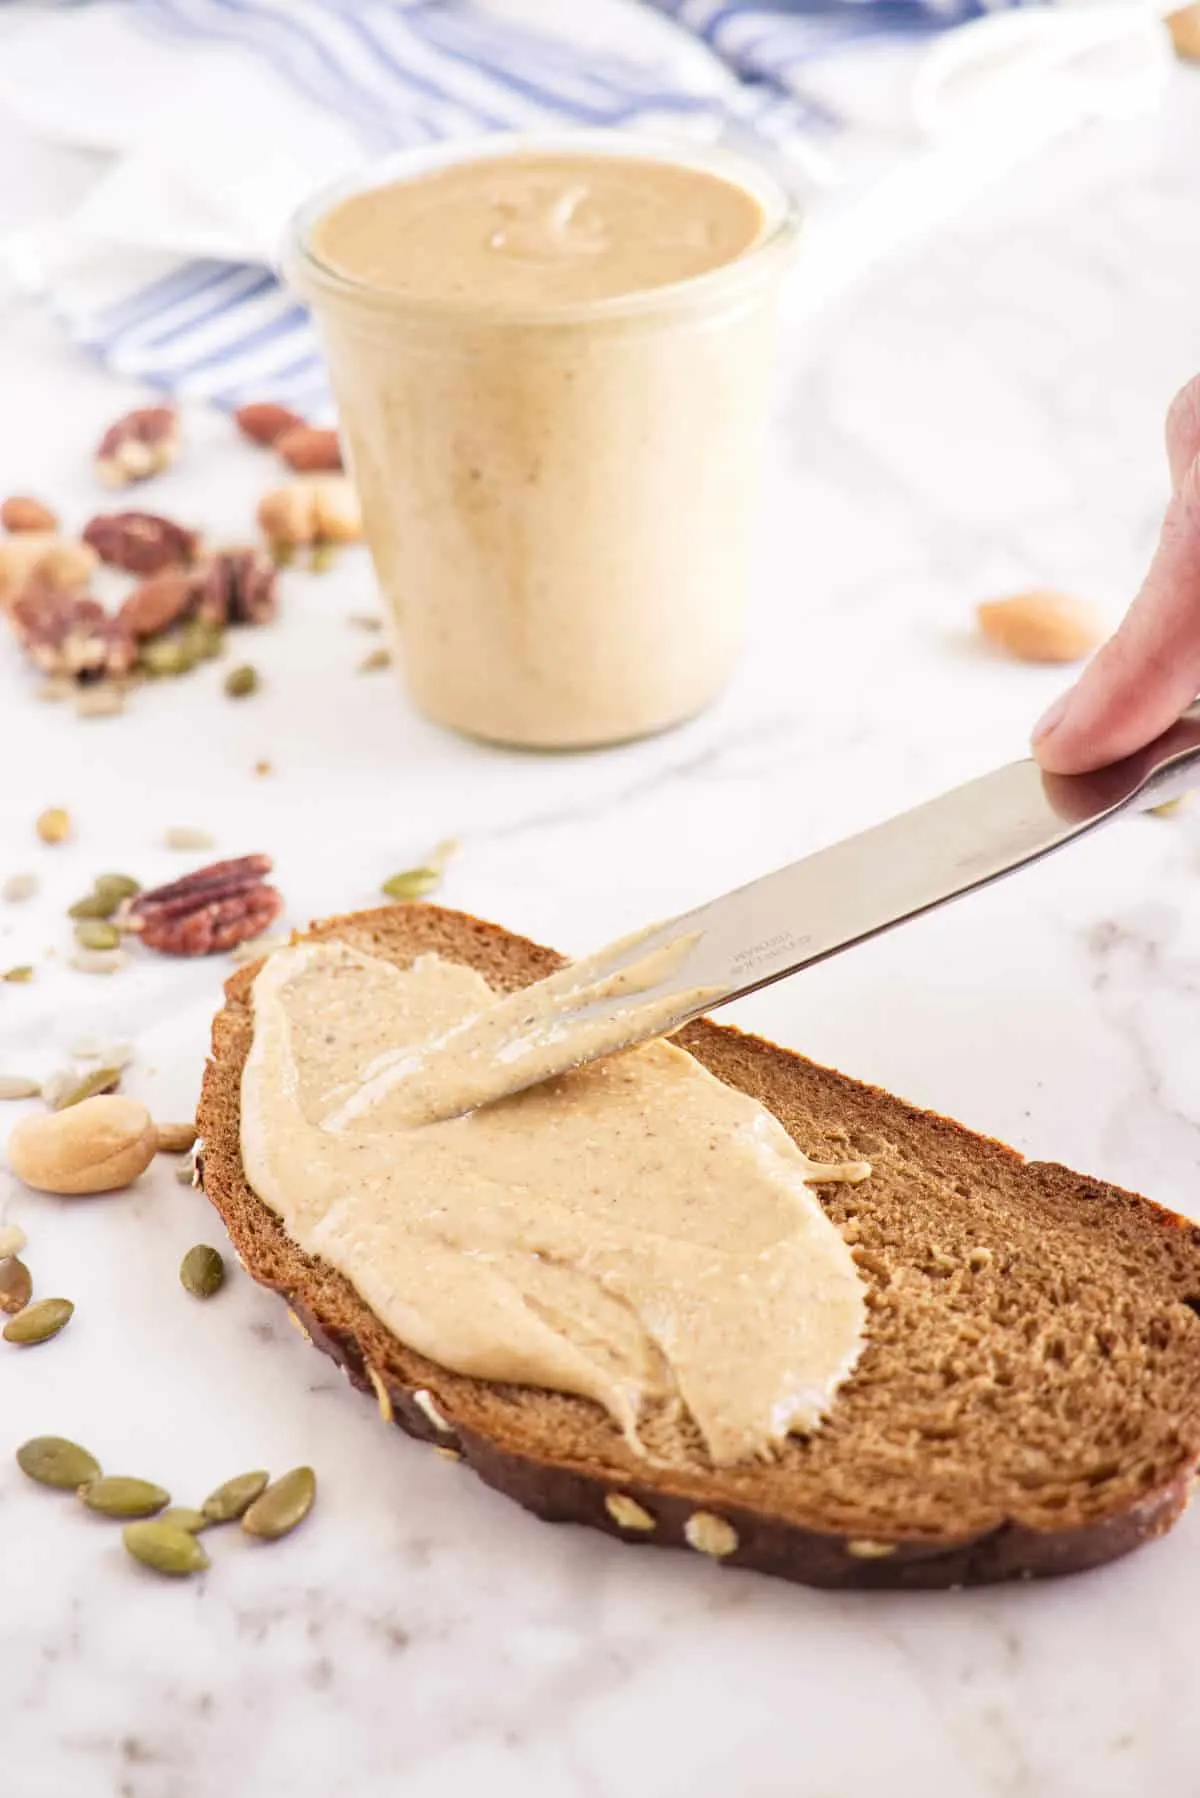 Roasted seed and nut butter